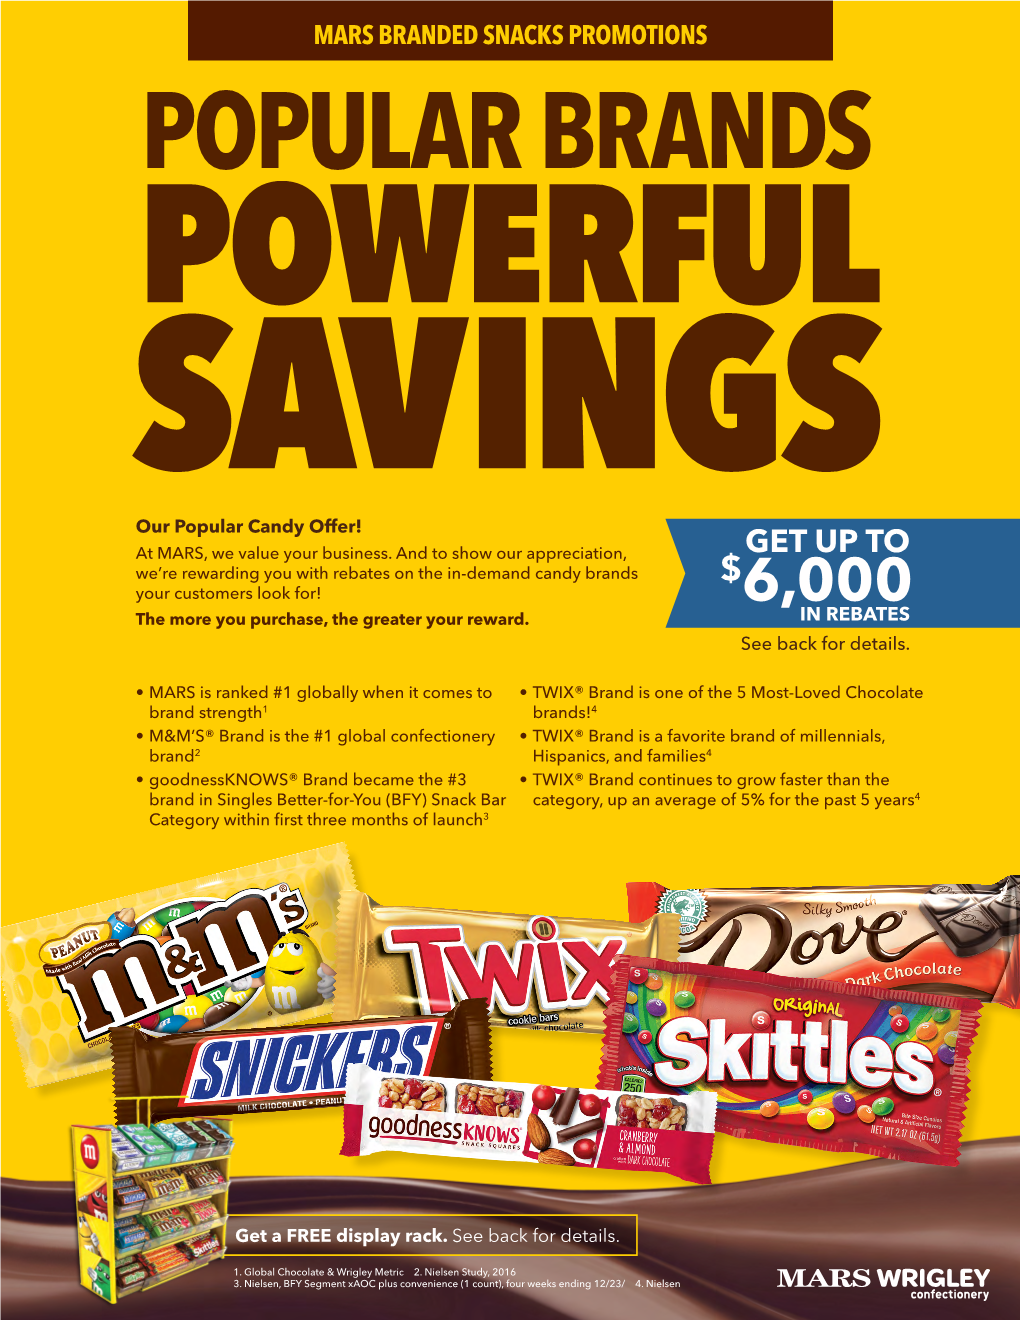 POPULAR BRANDS POWERFUL SAVINGS Our Popular Candy Offer! at MARS, We Value Your Business